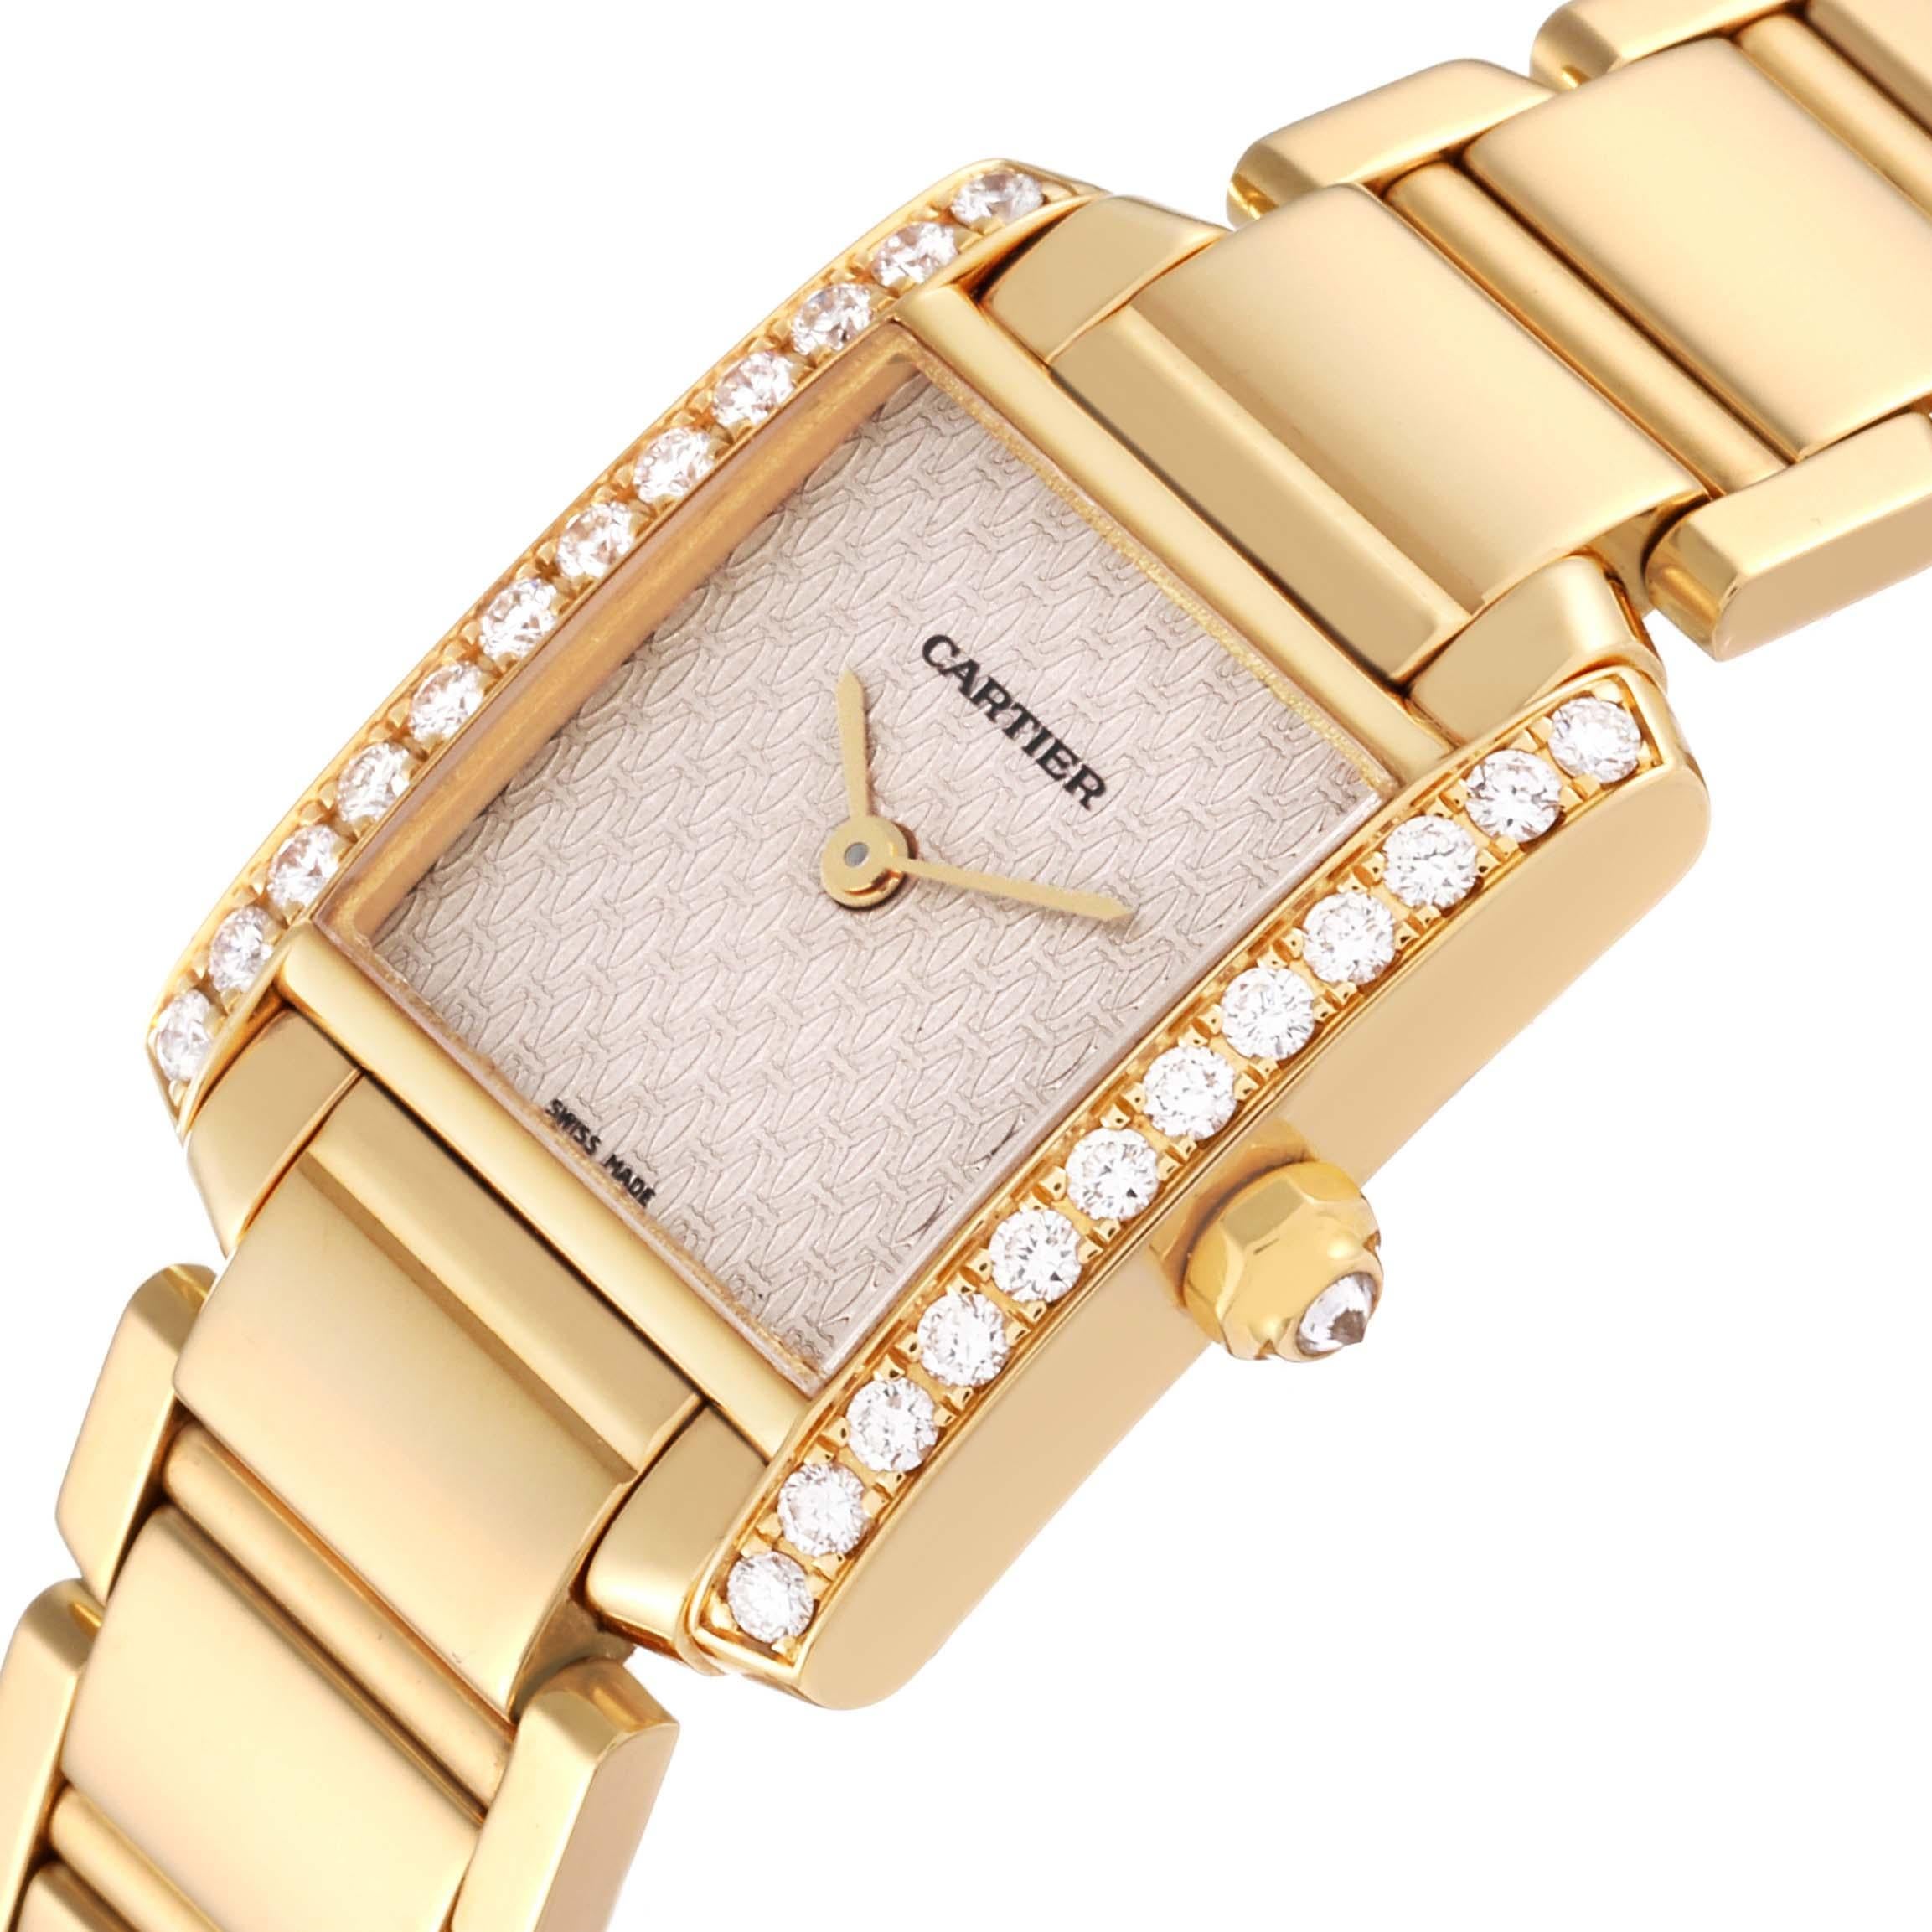 Cartier Tank Francaise Yellow Gold Rose Dial Diamond Ladies Watch WE1021R8 1